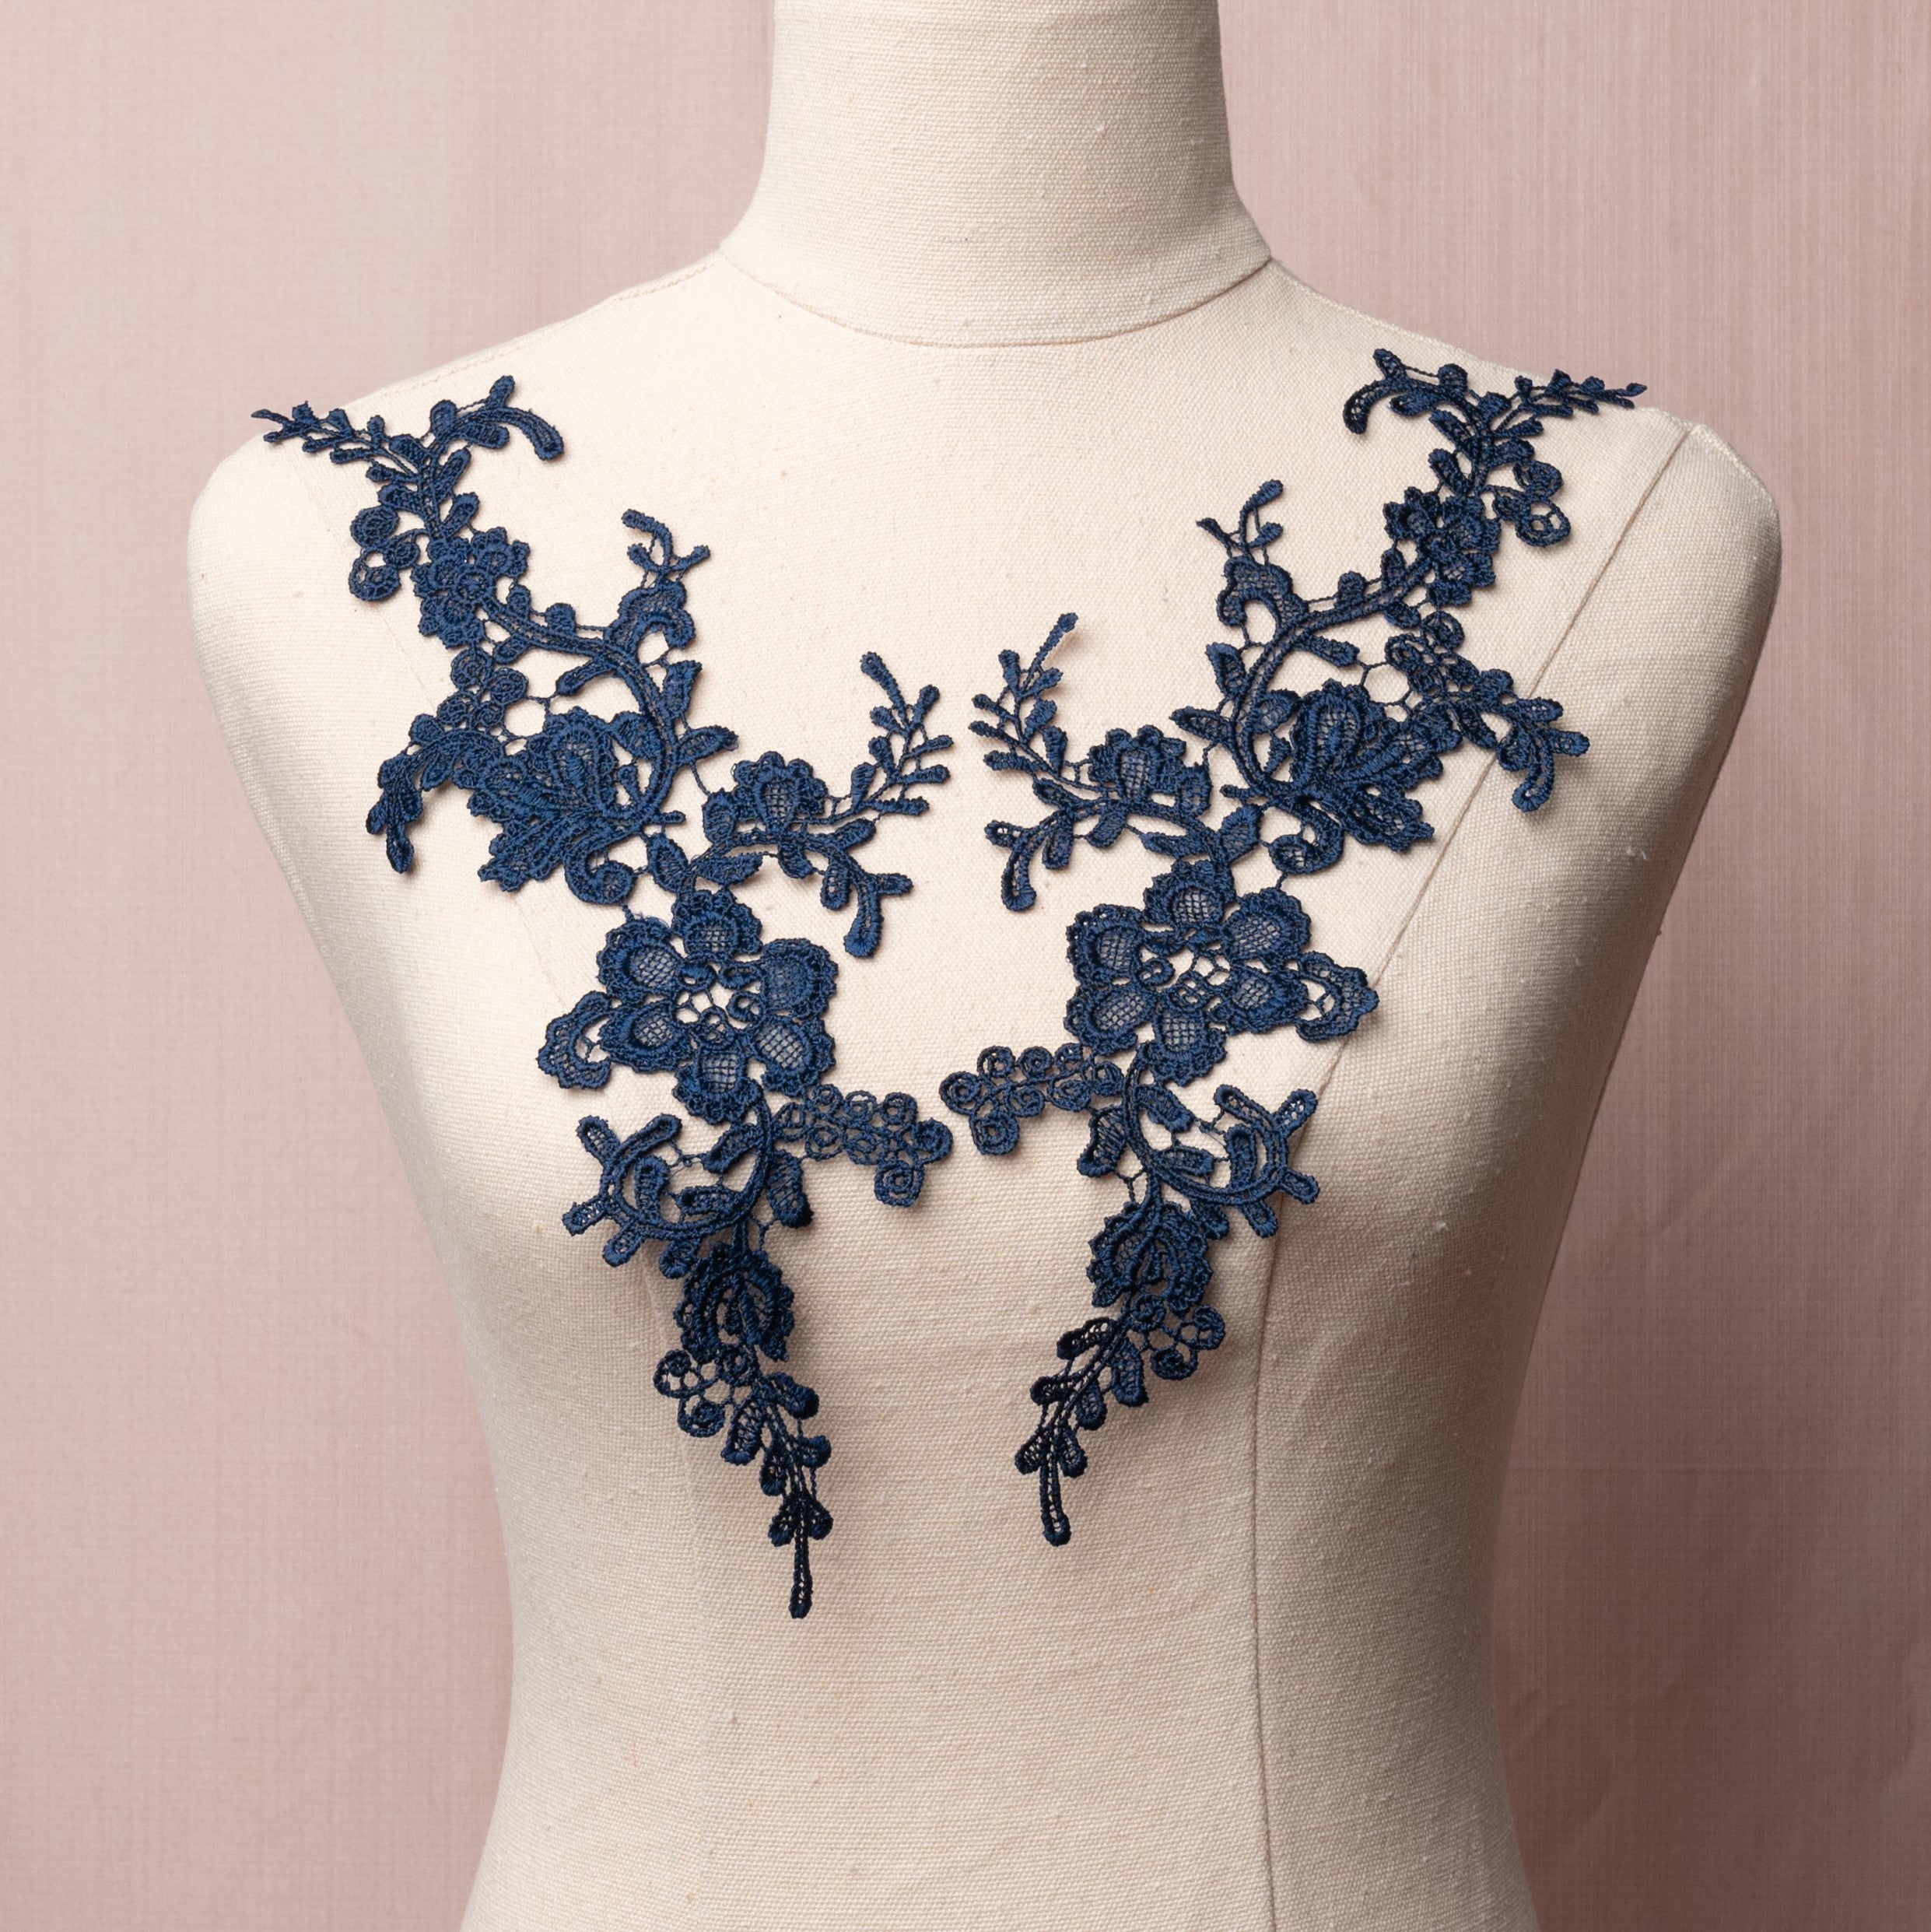 Heavily embroidered navy blue floral applique pair displayed on a mannequin.